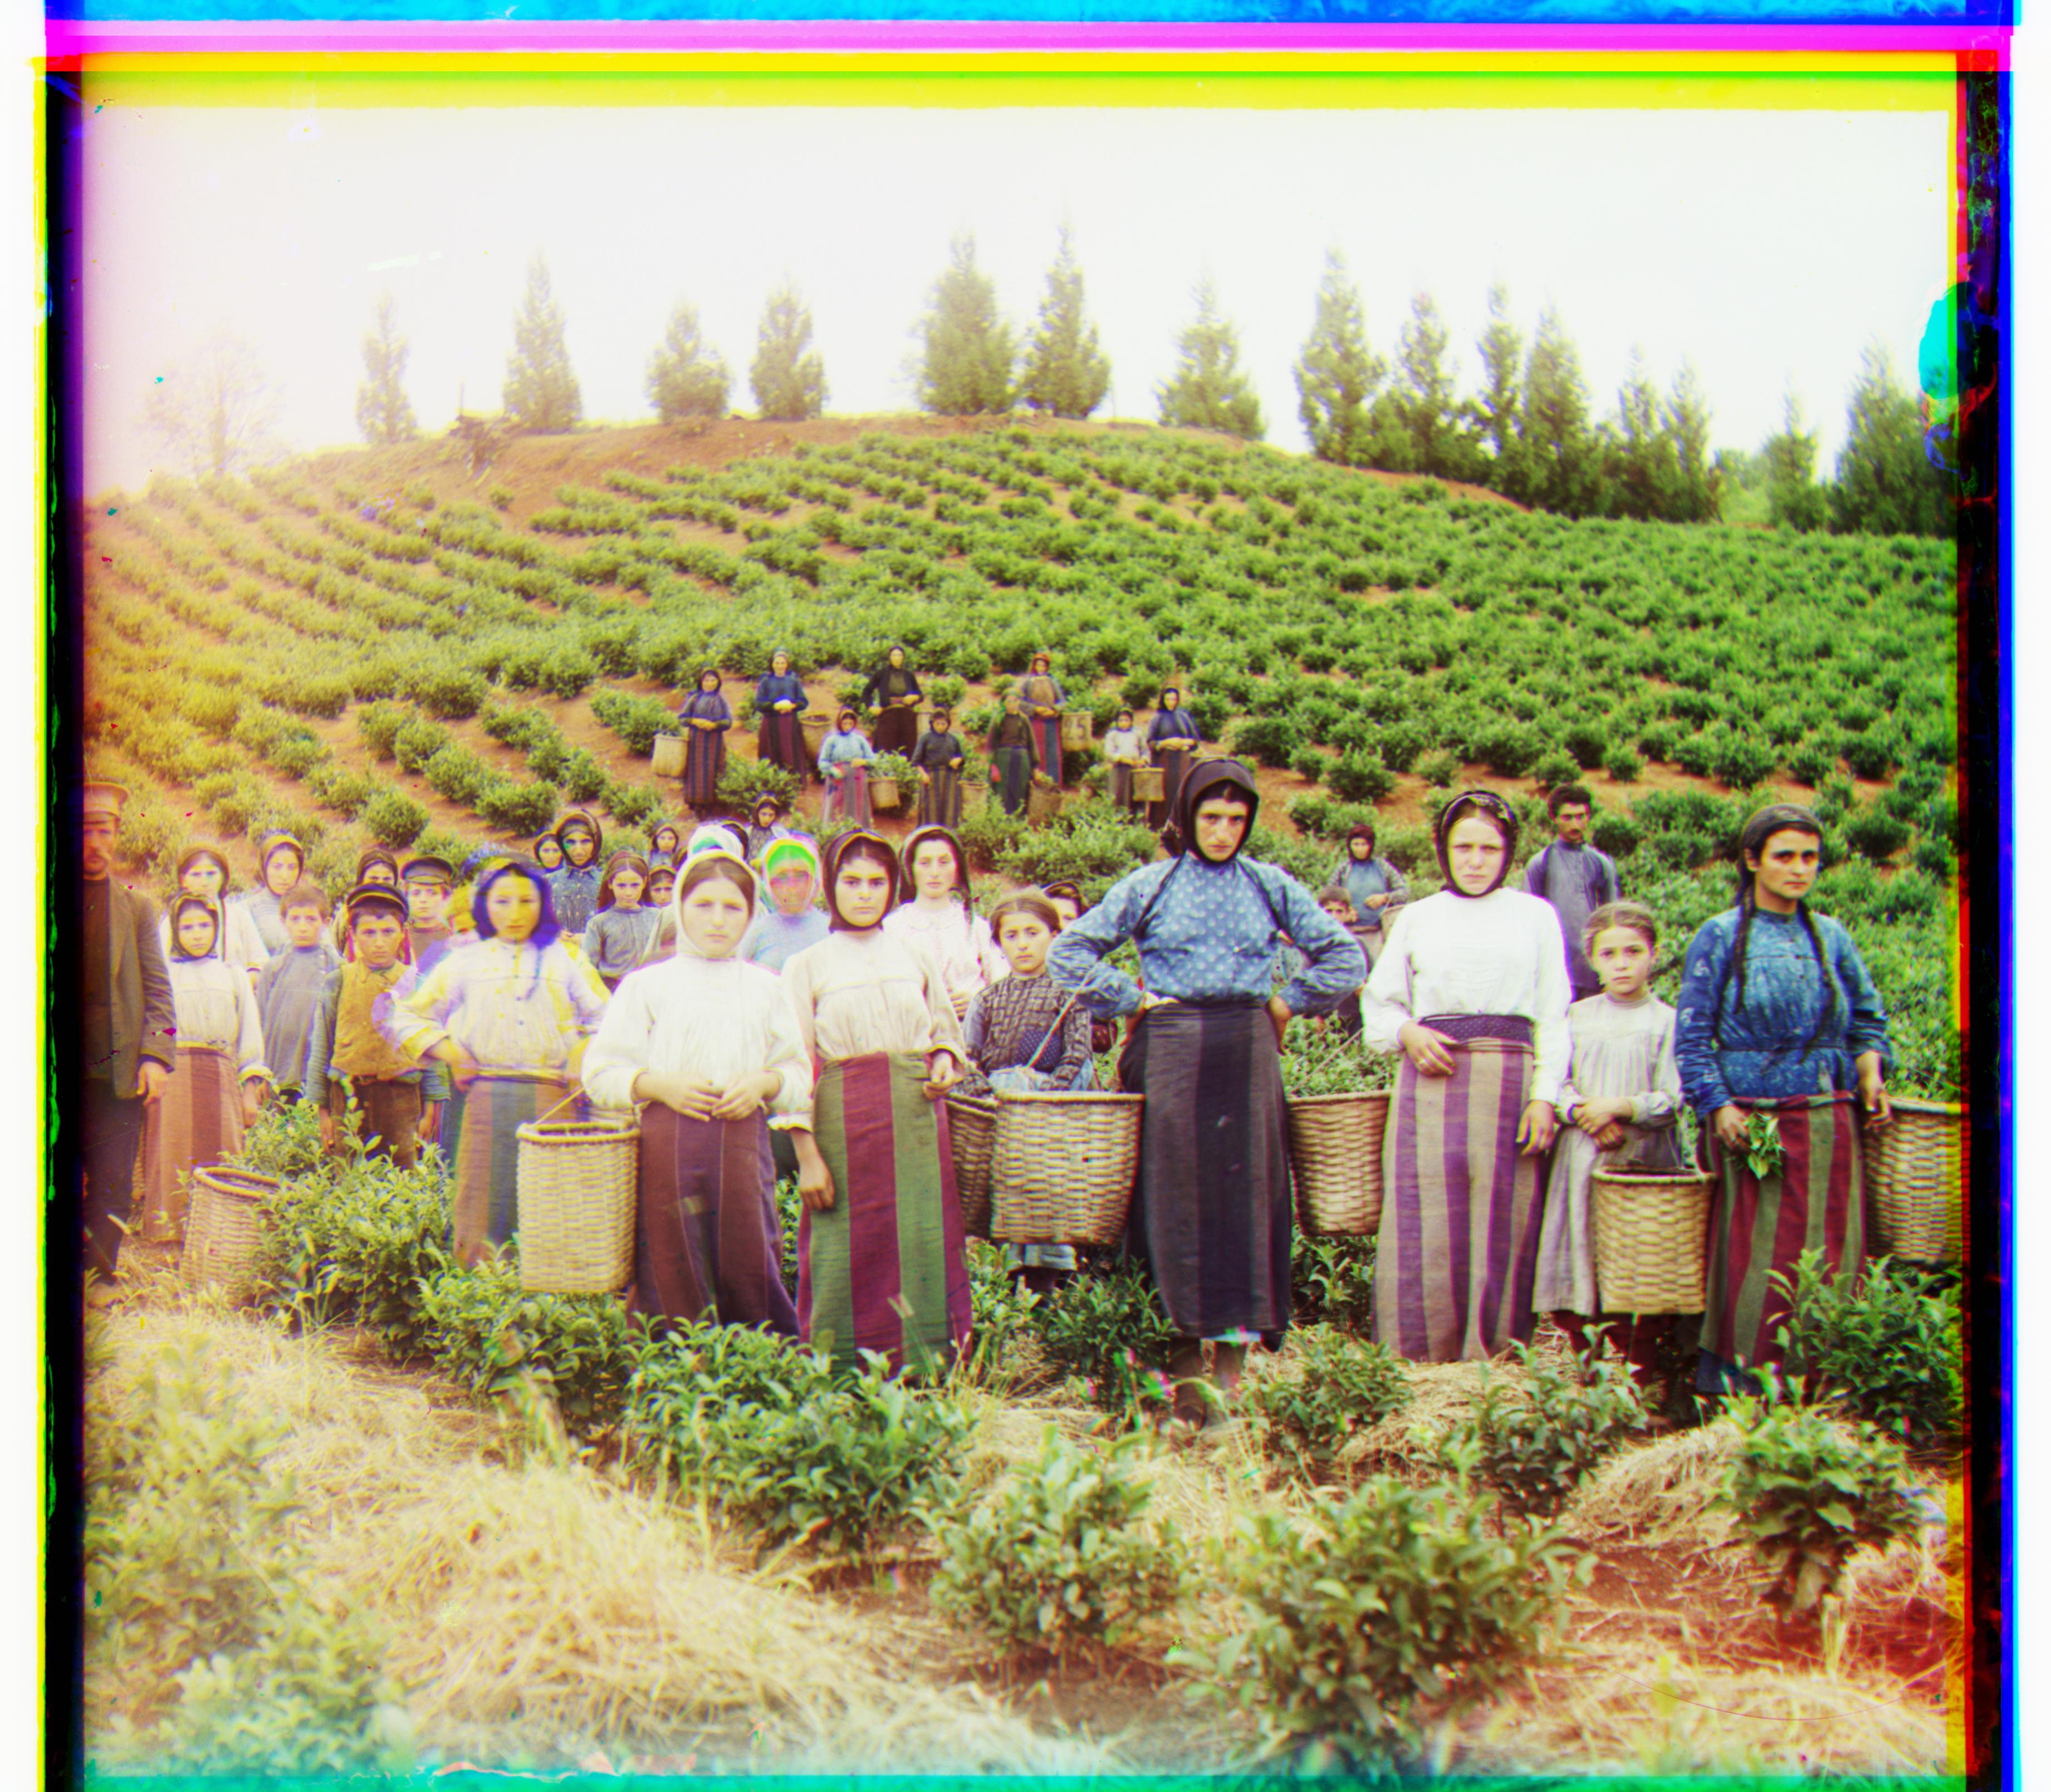 Harvesters-colorized